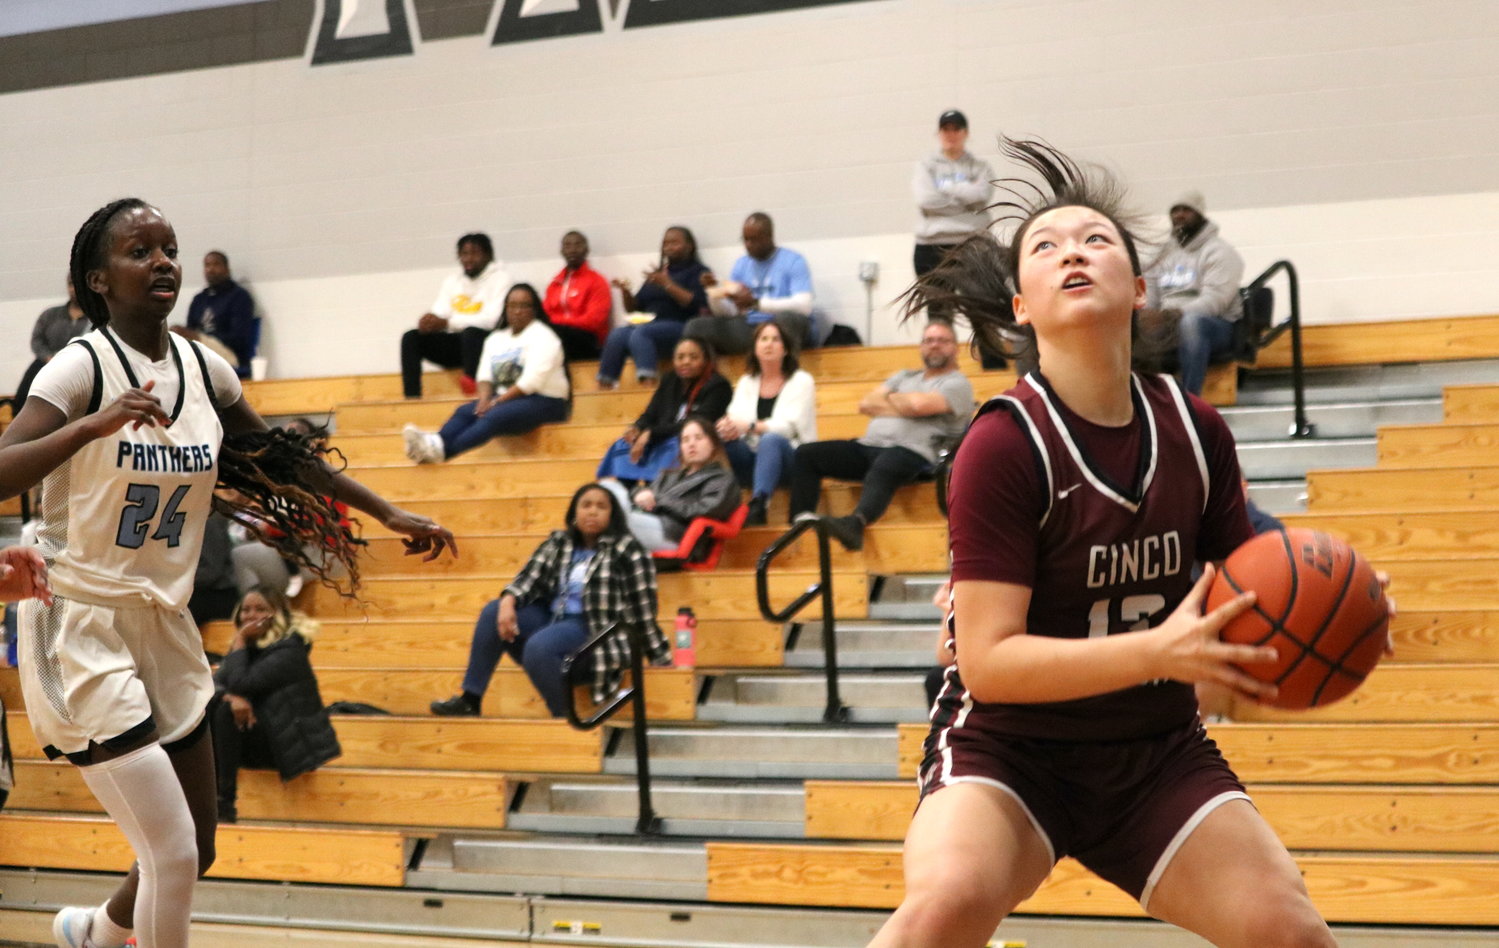 Madison Lee gathers after bringing in a pass during Friday's game between Cinco Ranch and Paetow at the Paetow gym.